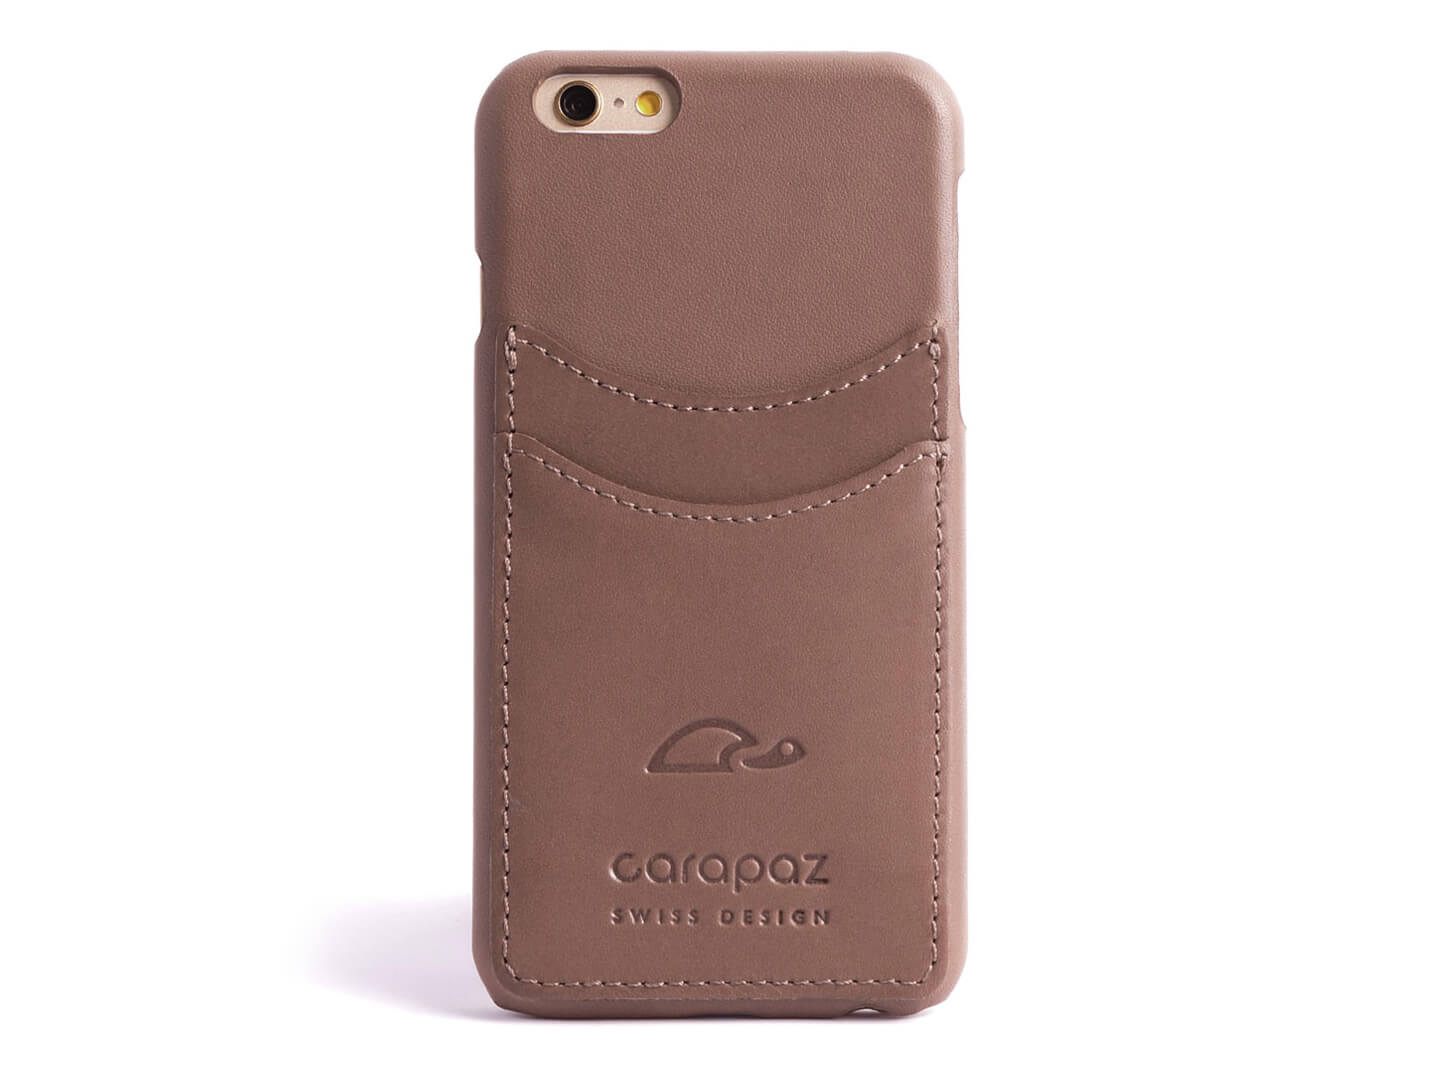 iPhone 6 slim case leather cover - Carapaz